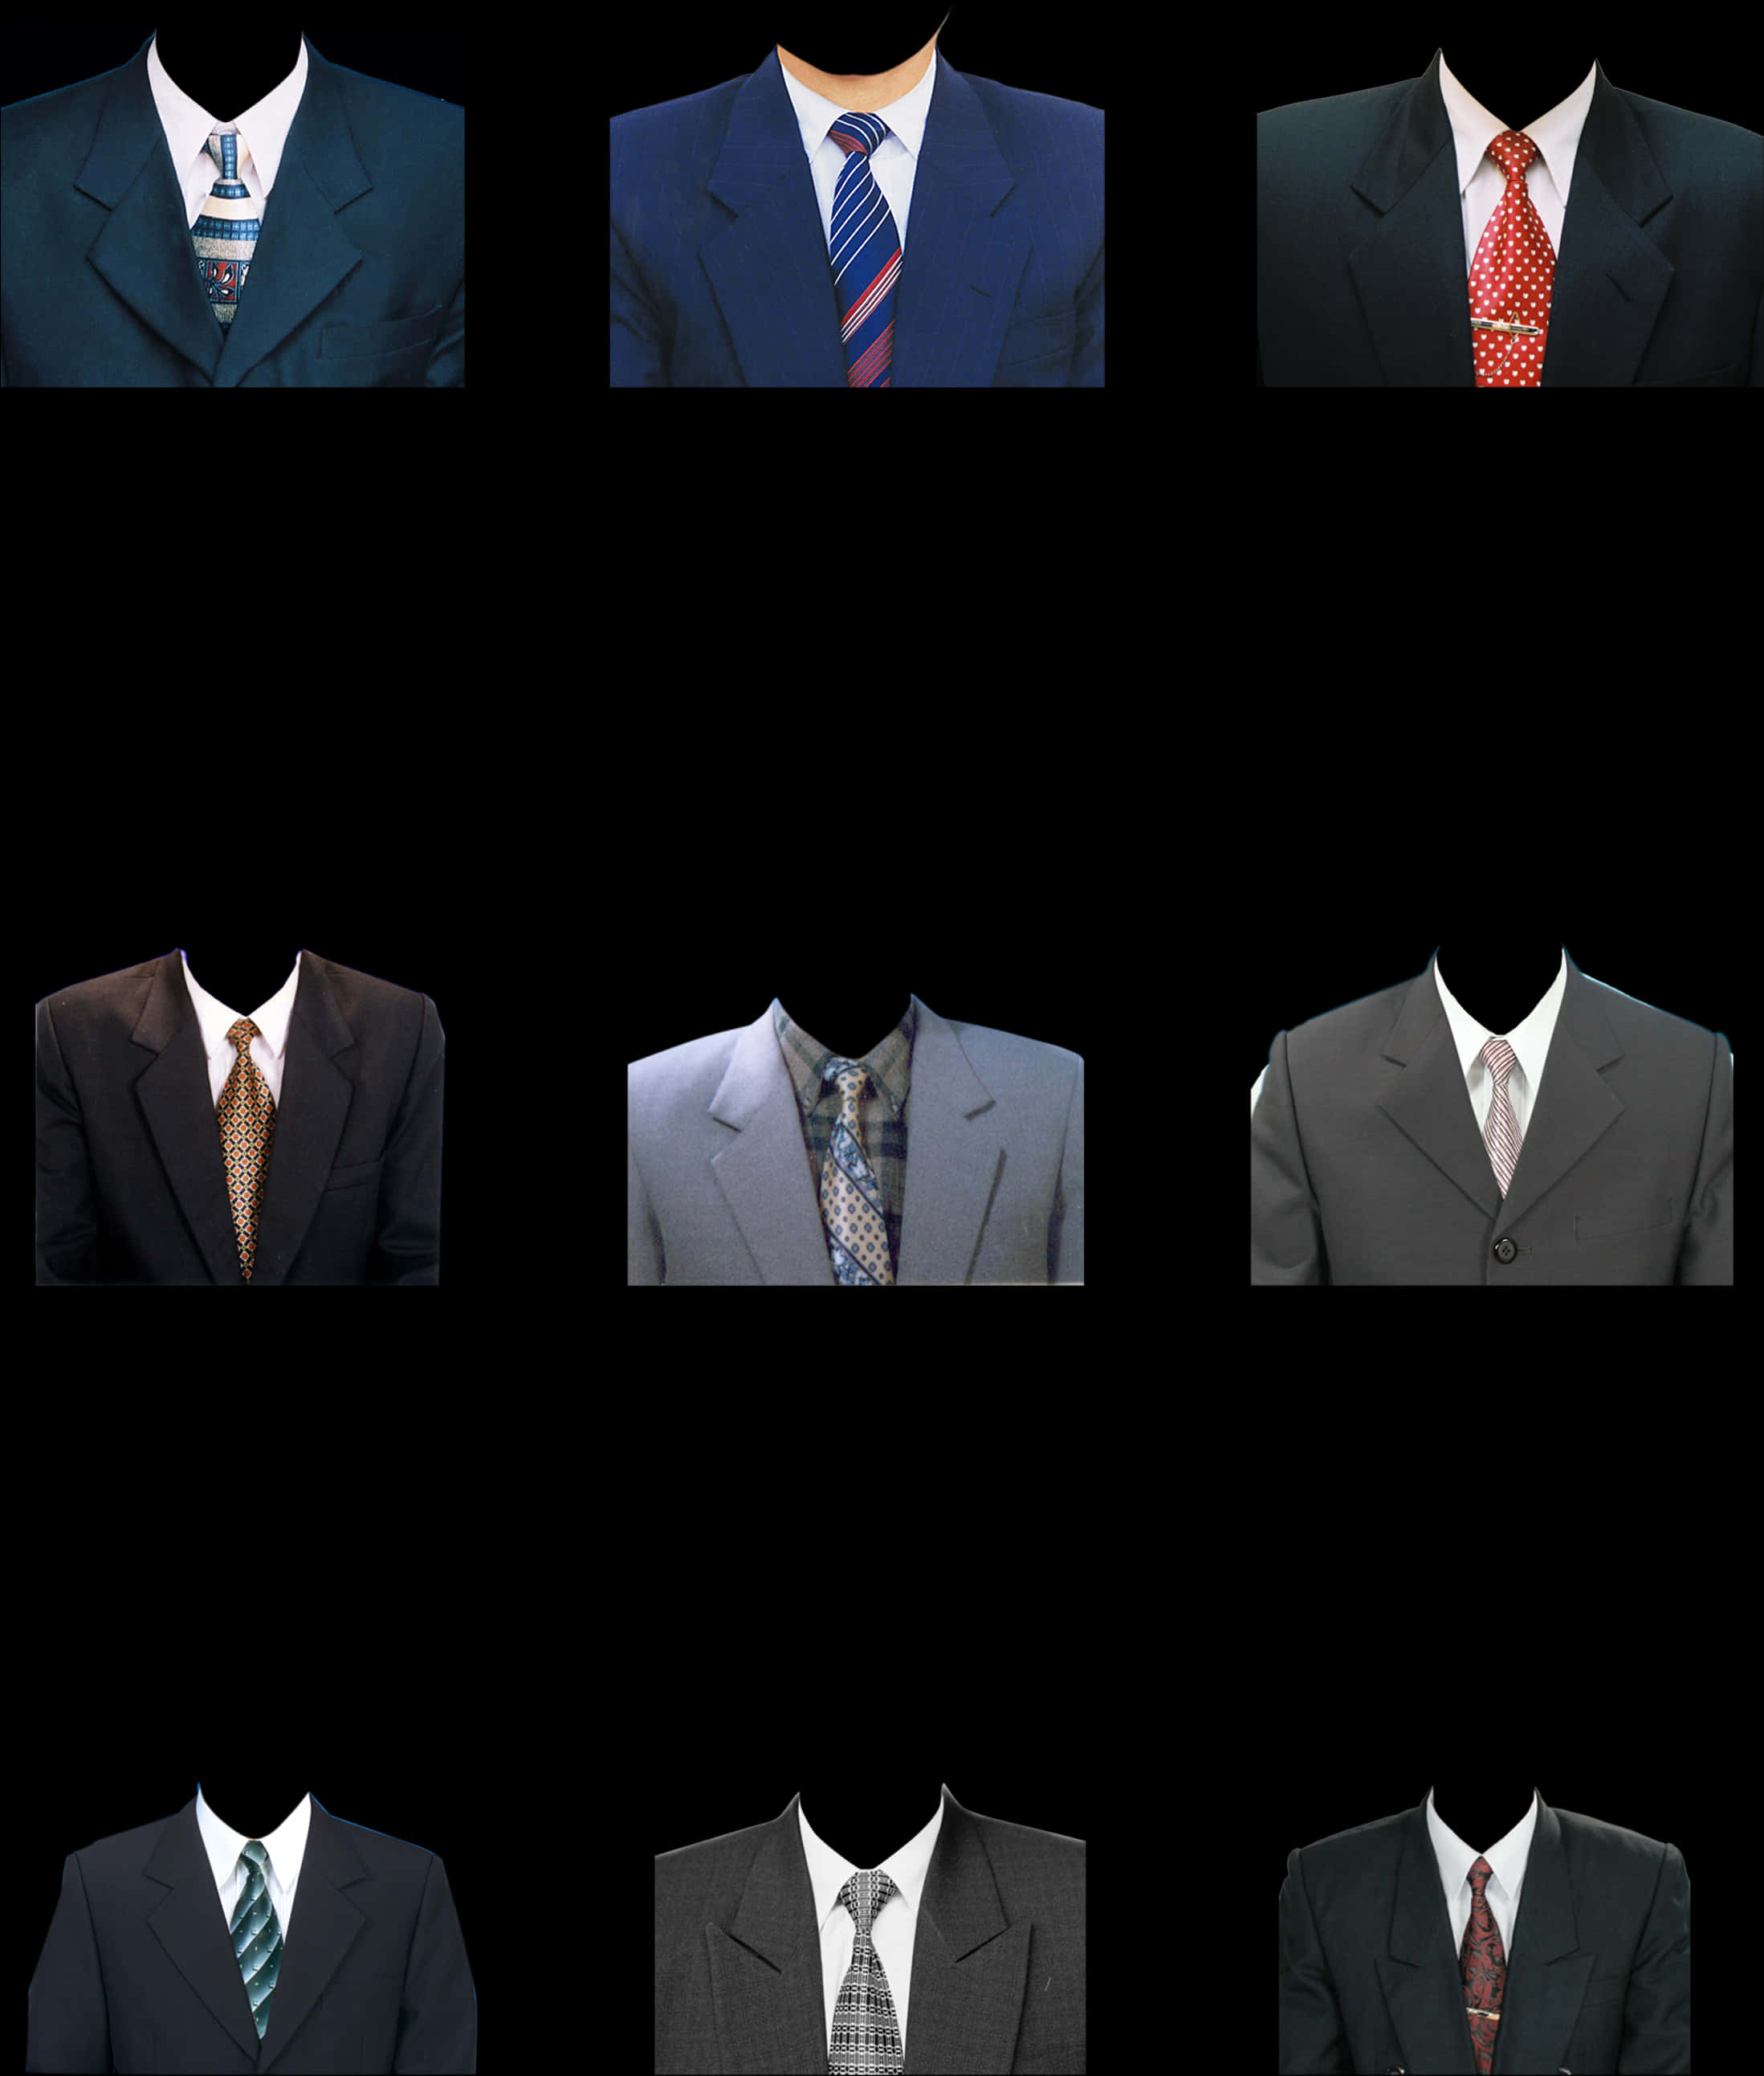 A Collage Of Different Suits